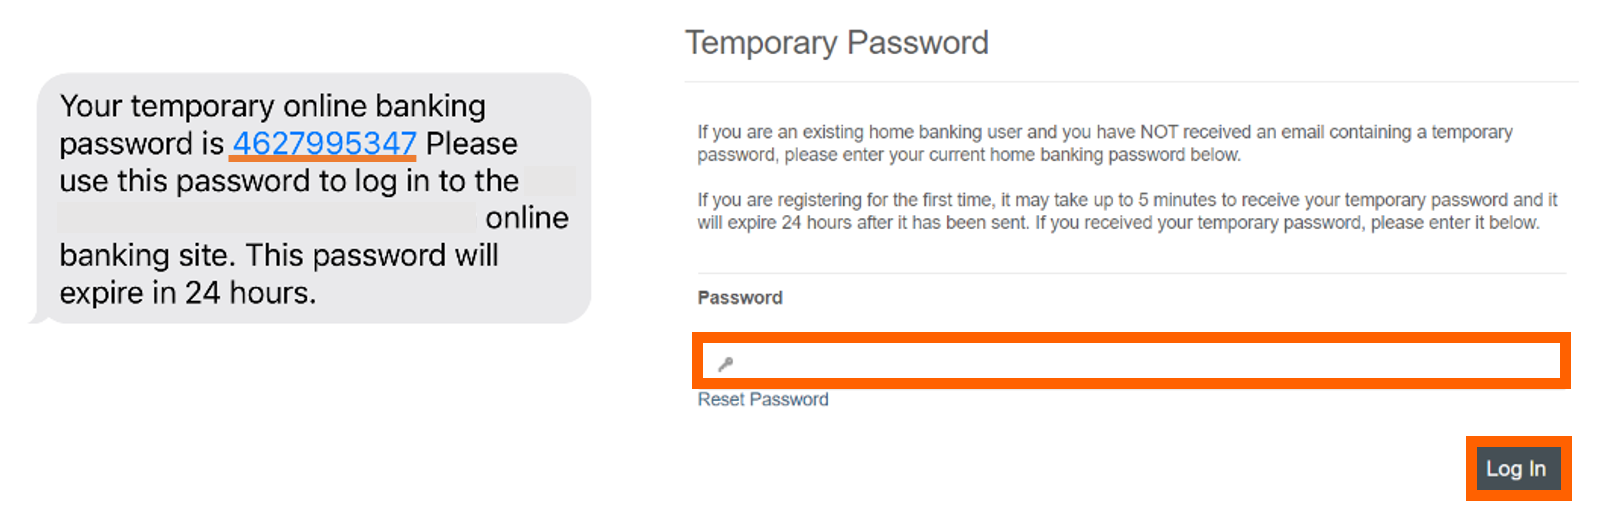 Online banking registration with temporary password instructions. Text confirmation with online banking temporary passcode is sent. Then, temporary password is entered into registration screen and 'Log In' button is selected.